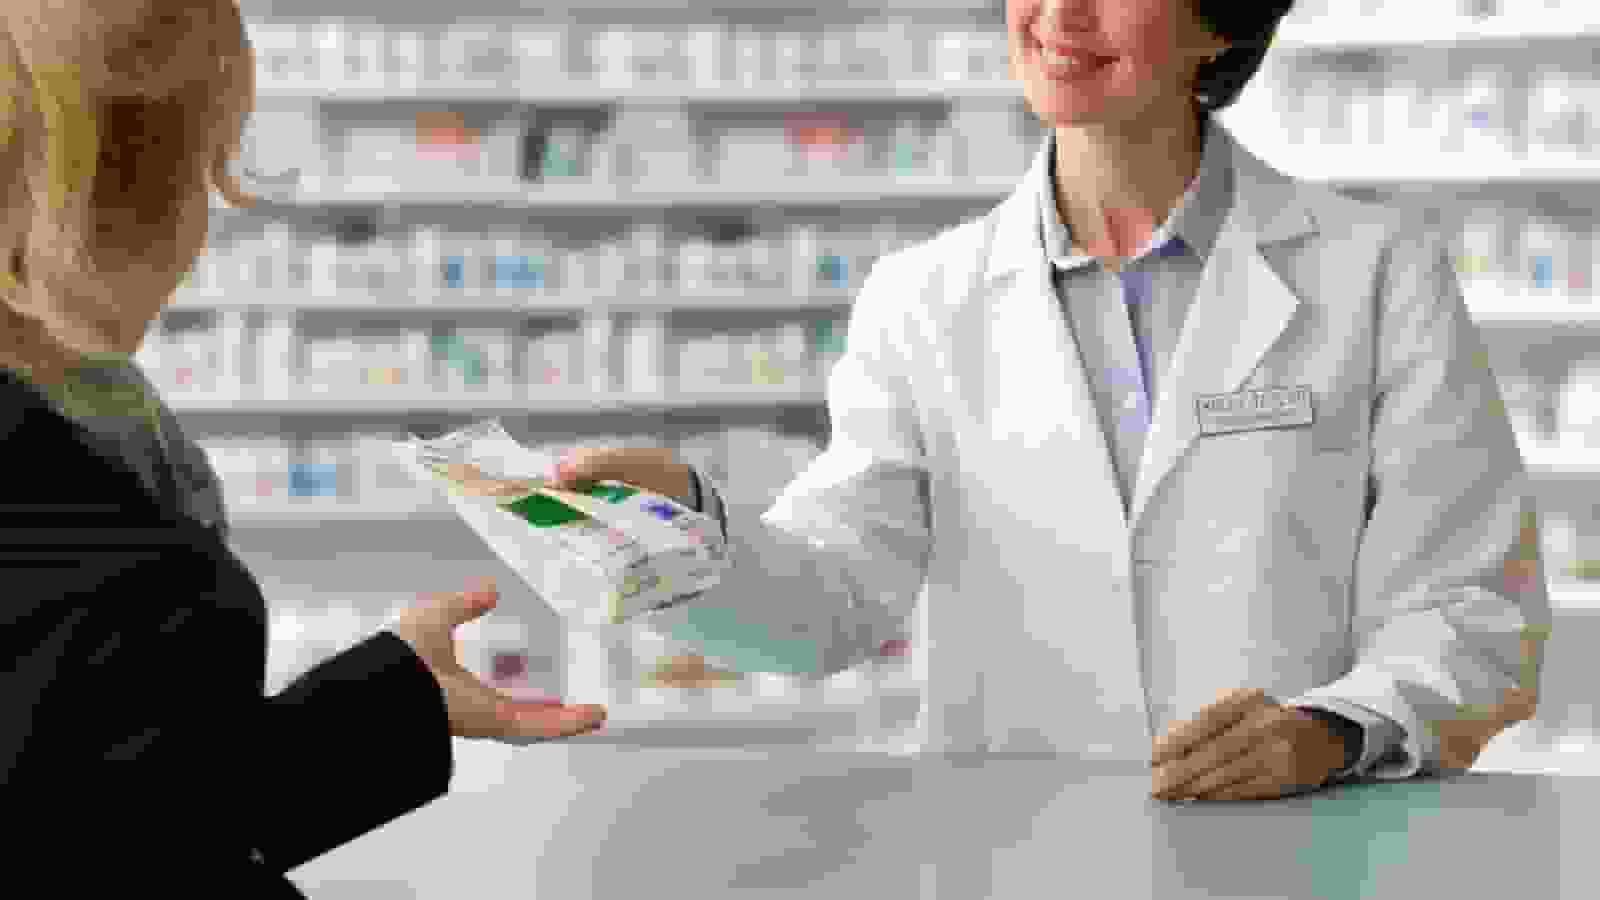 Staffing shortages are affecting pharmacies